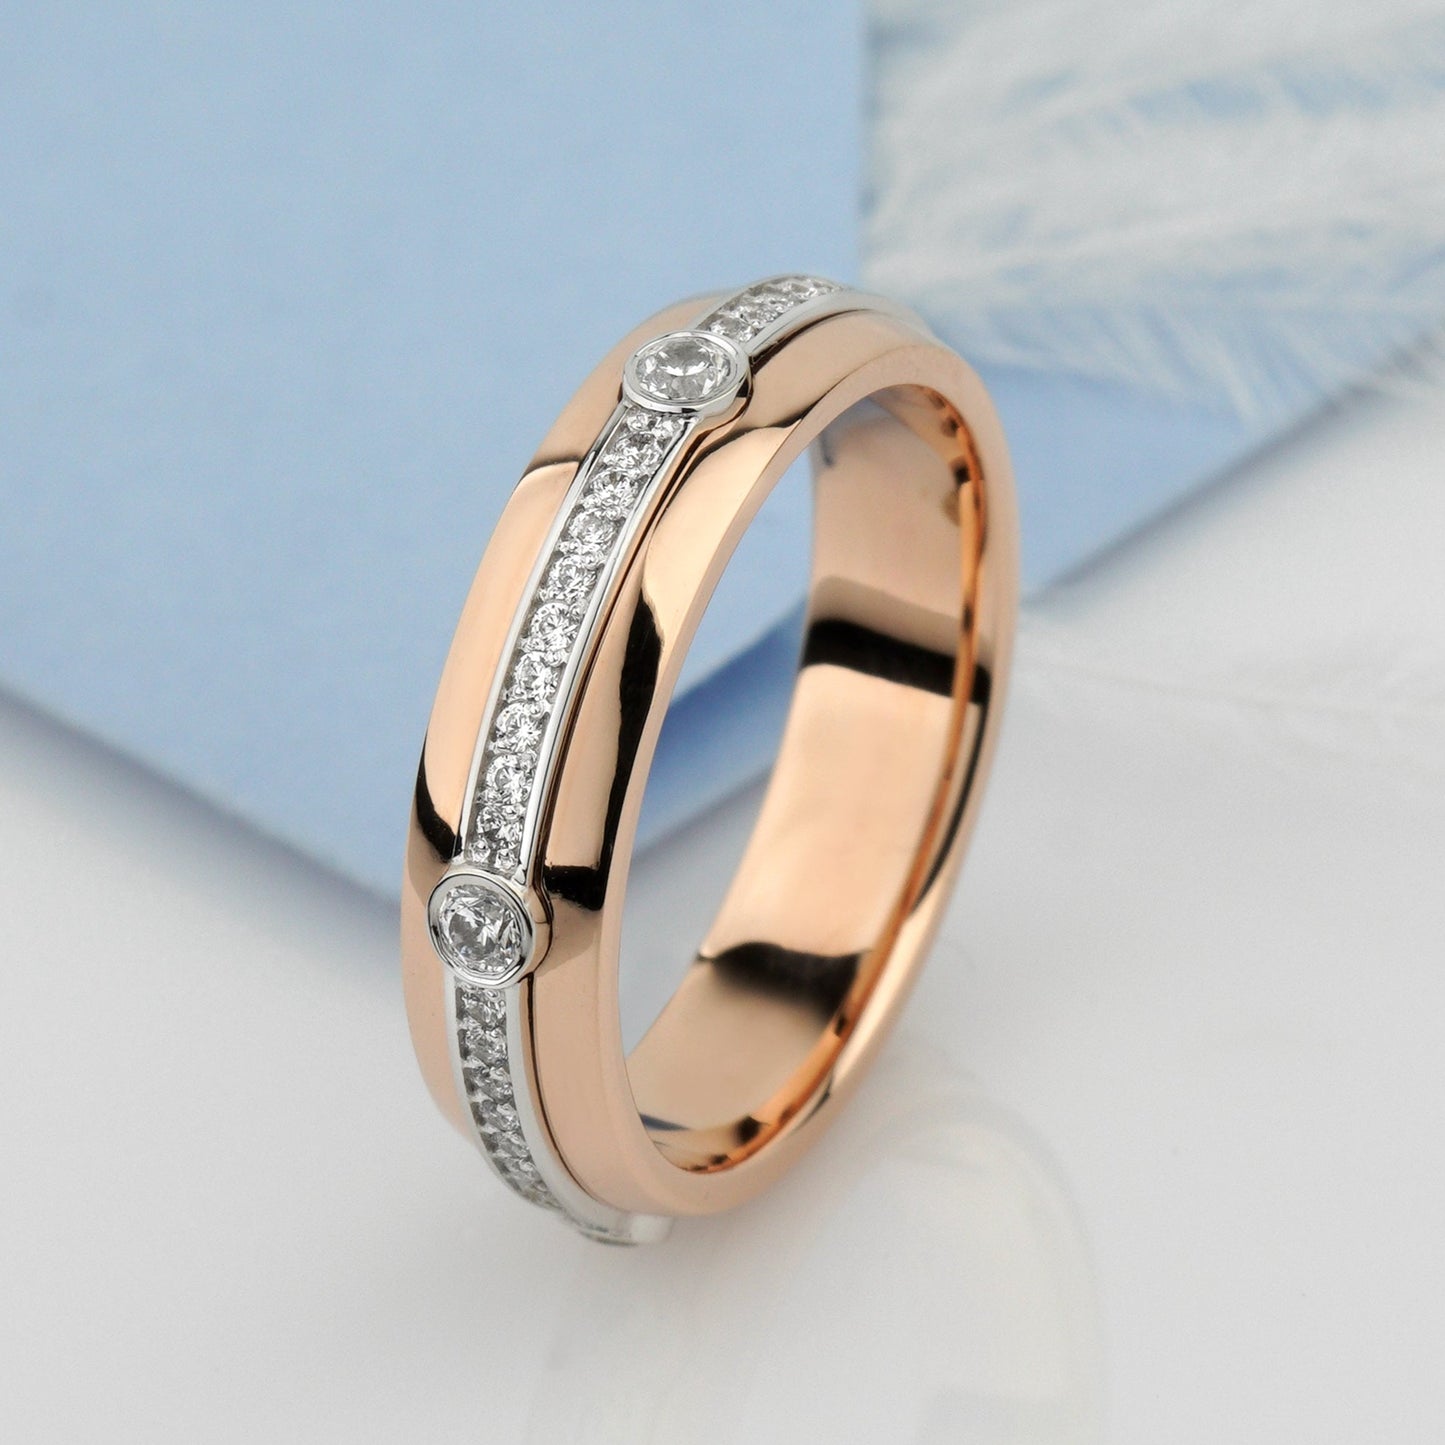 Two-tone gold women's wedding band. Unique wedding ring for women. Female wedding band. Rings for women. Gold band ring. Ring for her.  Diamond wedding band. Moissanite wedding ring